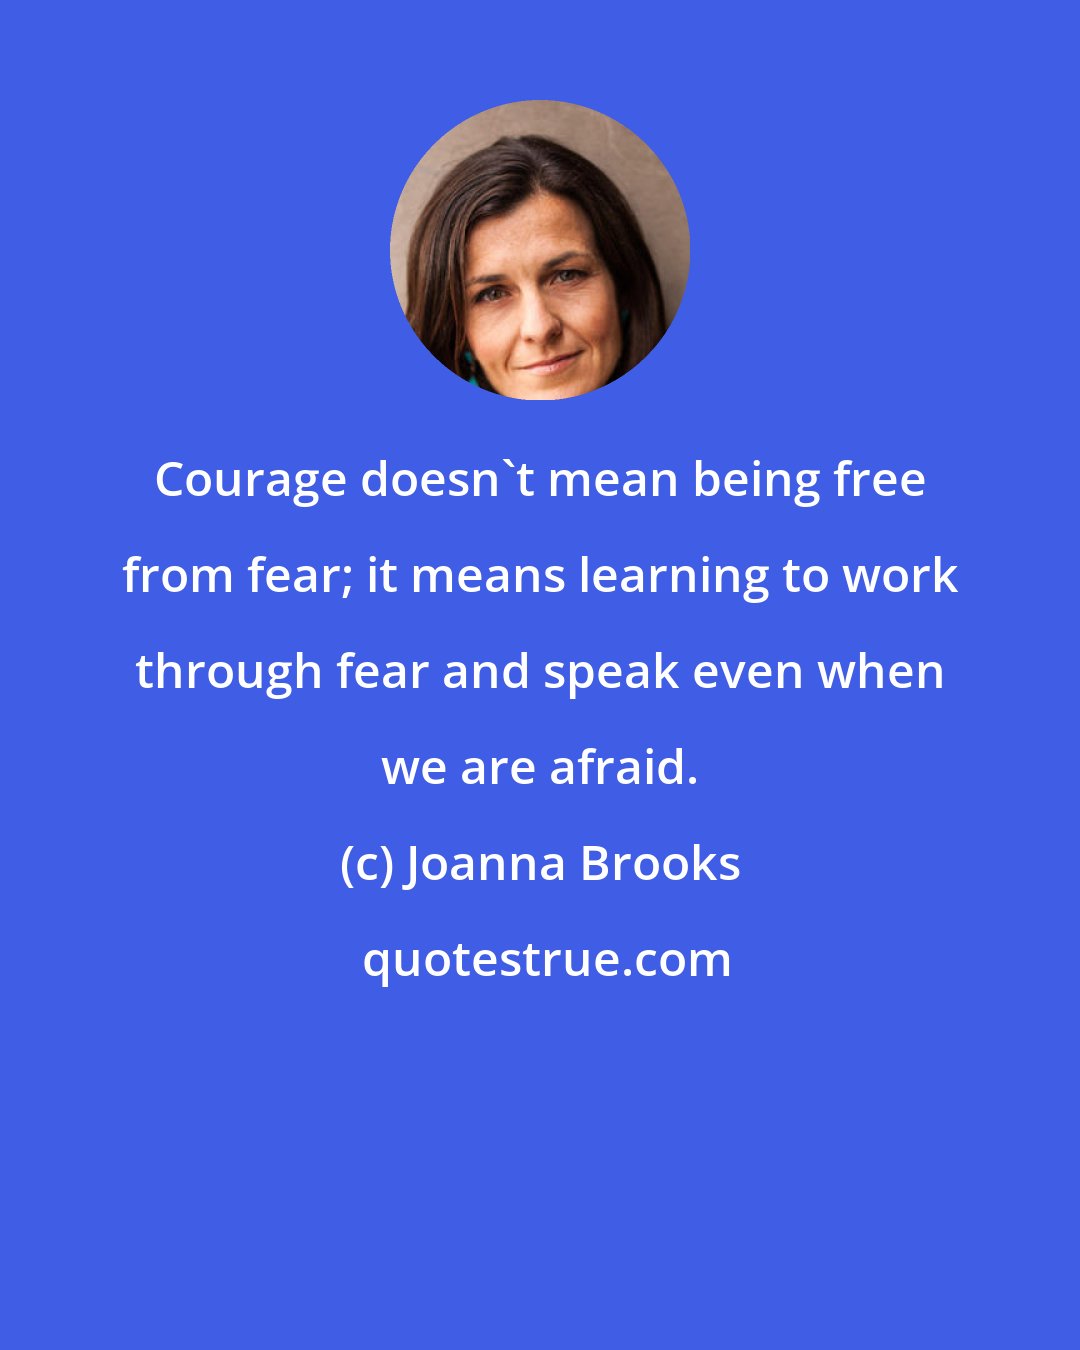 Joanna Brooks: Courage doesn't mean being free from fear; it means learning to work through fear and speak even when we are afraid.